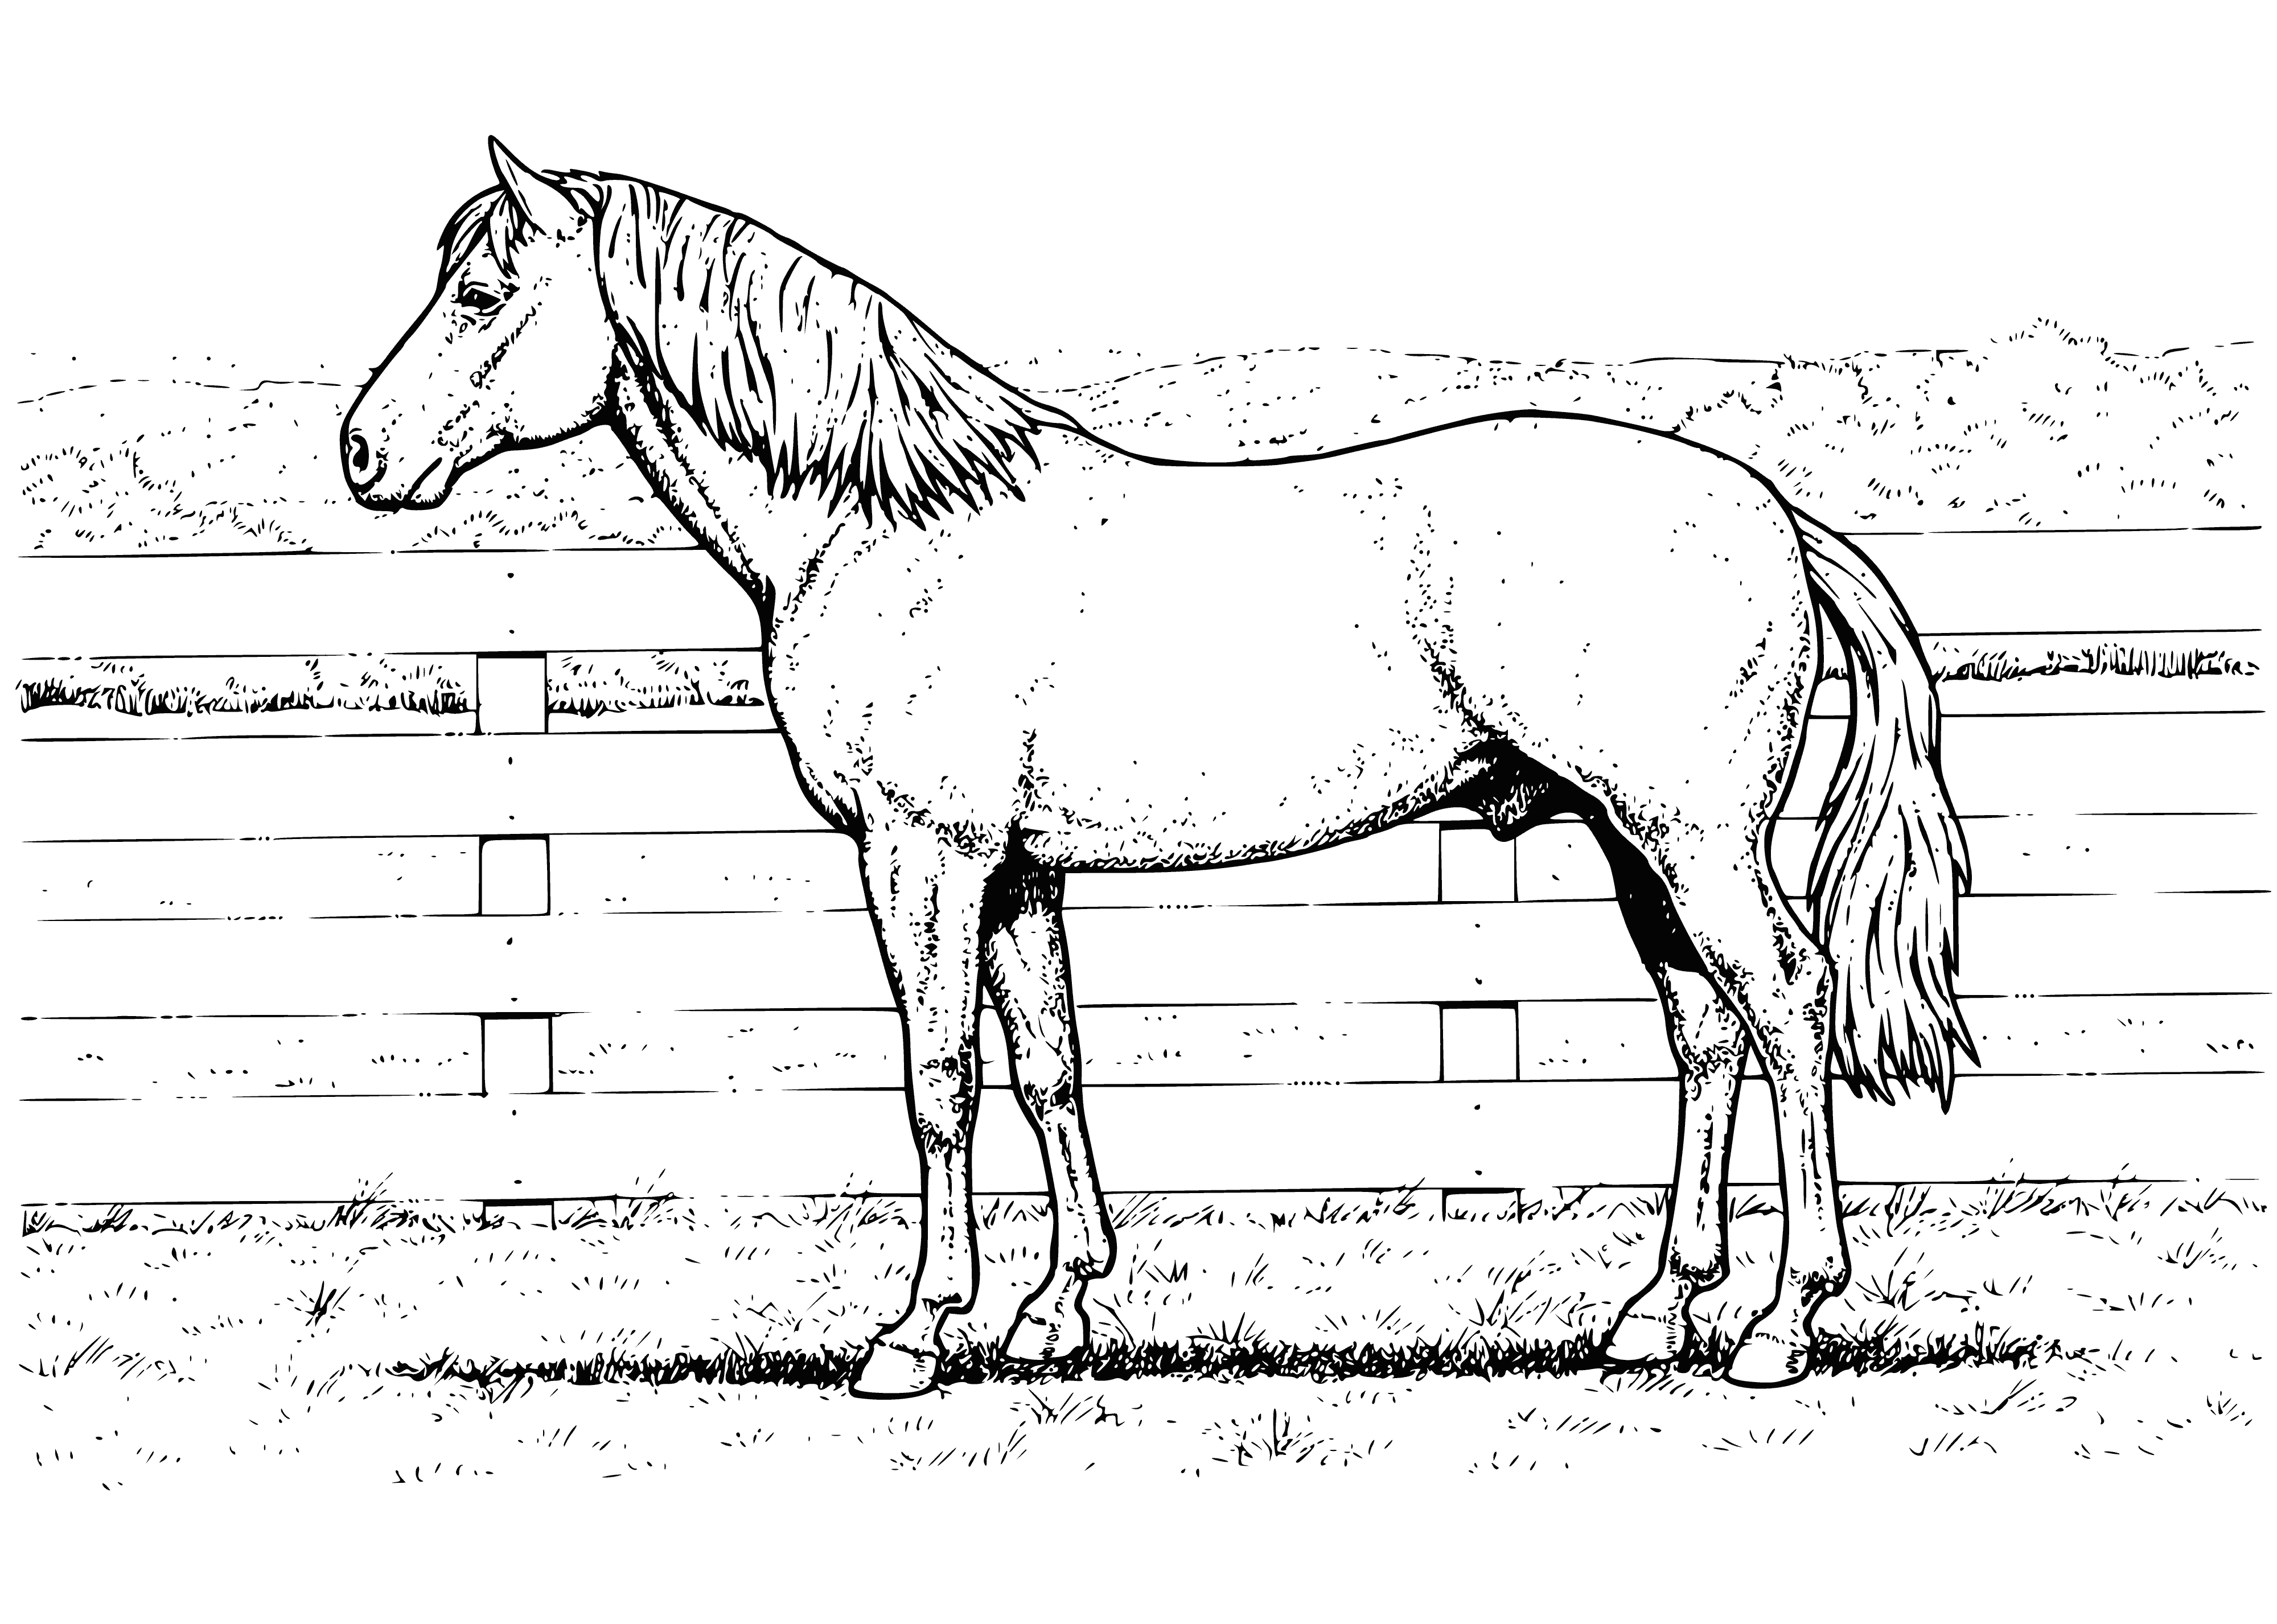 coloring page: Horses evolved from small multi-toed creatures 45-55 million years ago. Herbivores, they survive on grass & other vegetation via digestive systems.